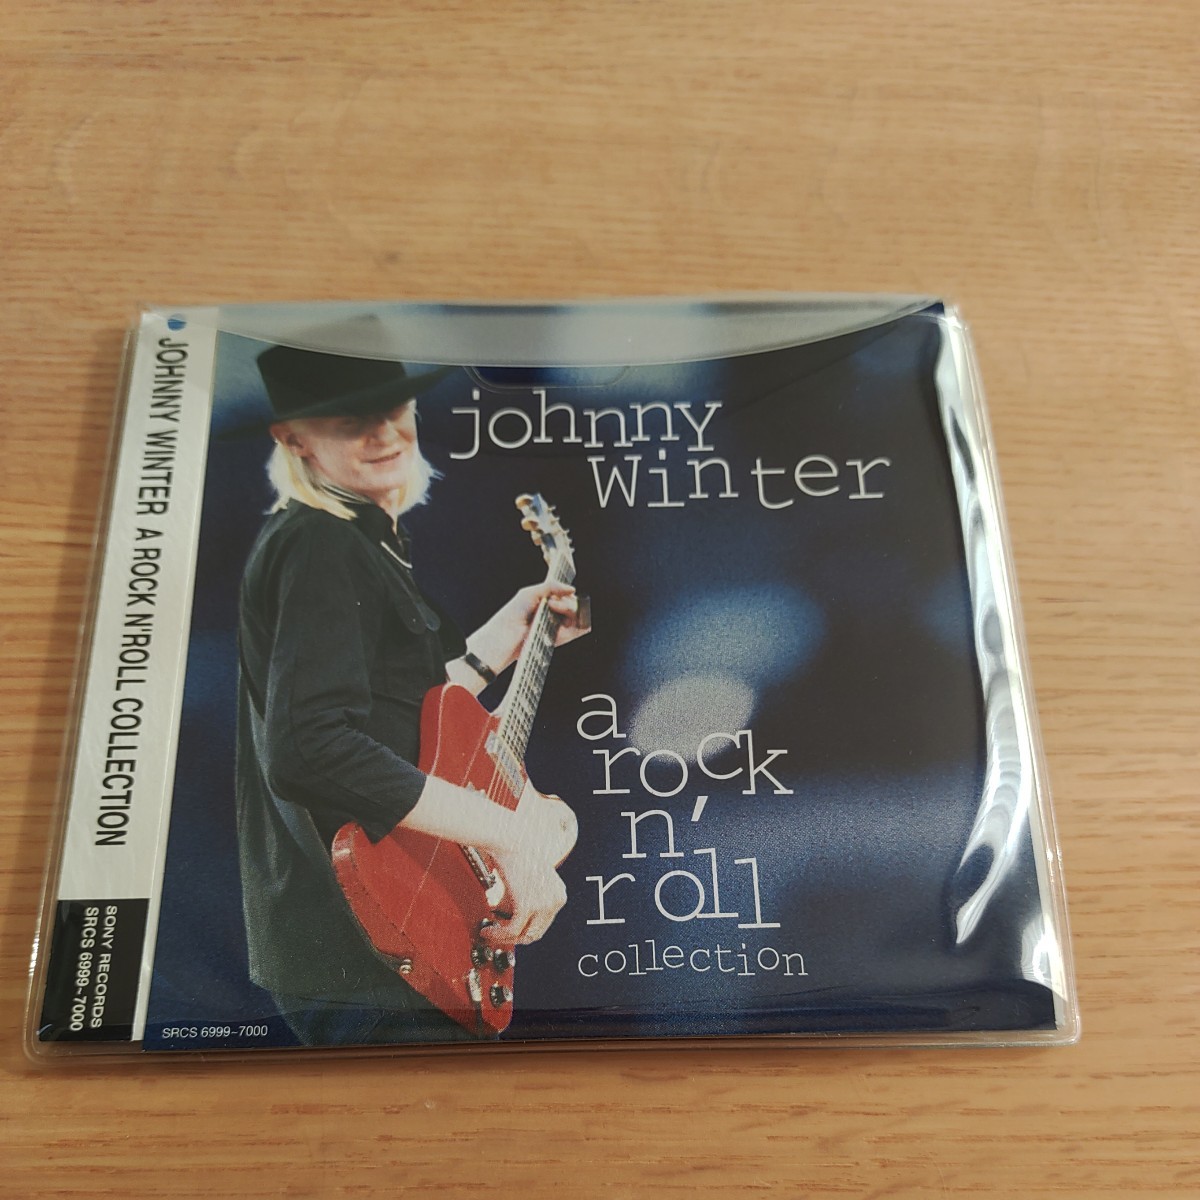 Johnny Winter / A Rock'n Roll Collection （国内盤２CD)　ジョニー・ウィンター_画像5